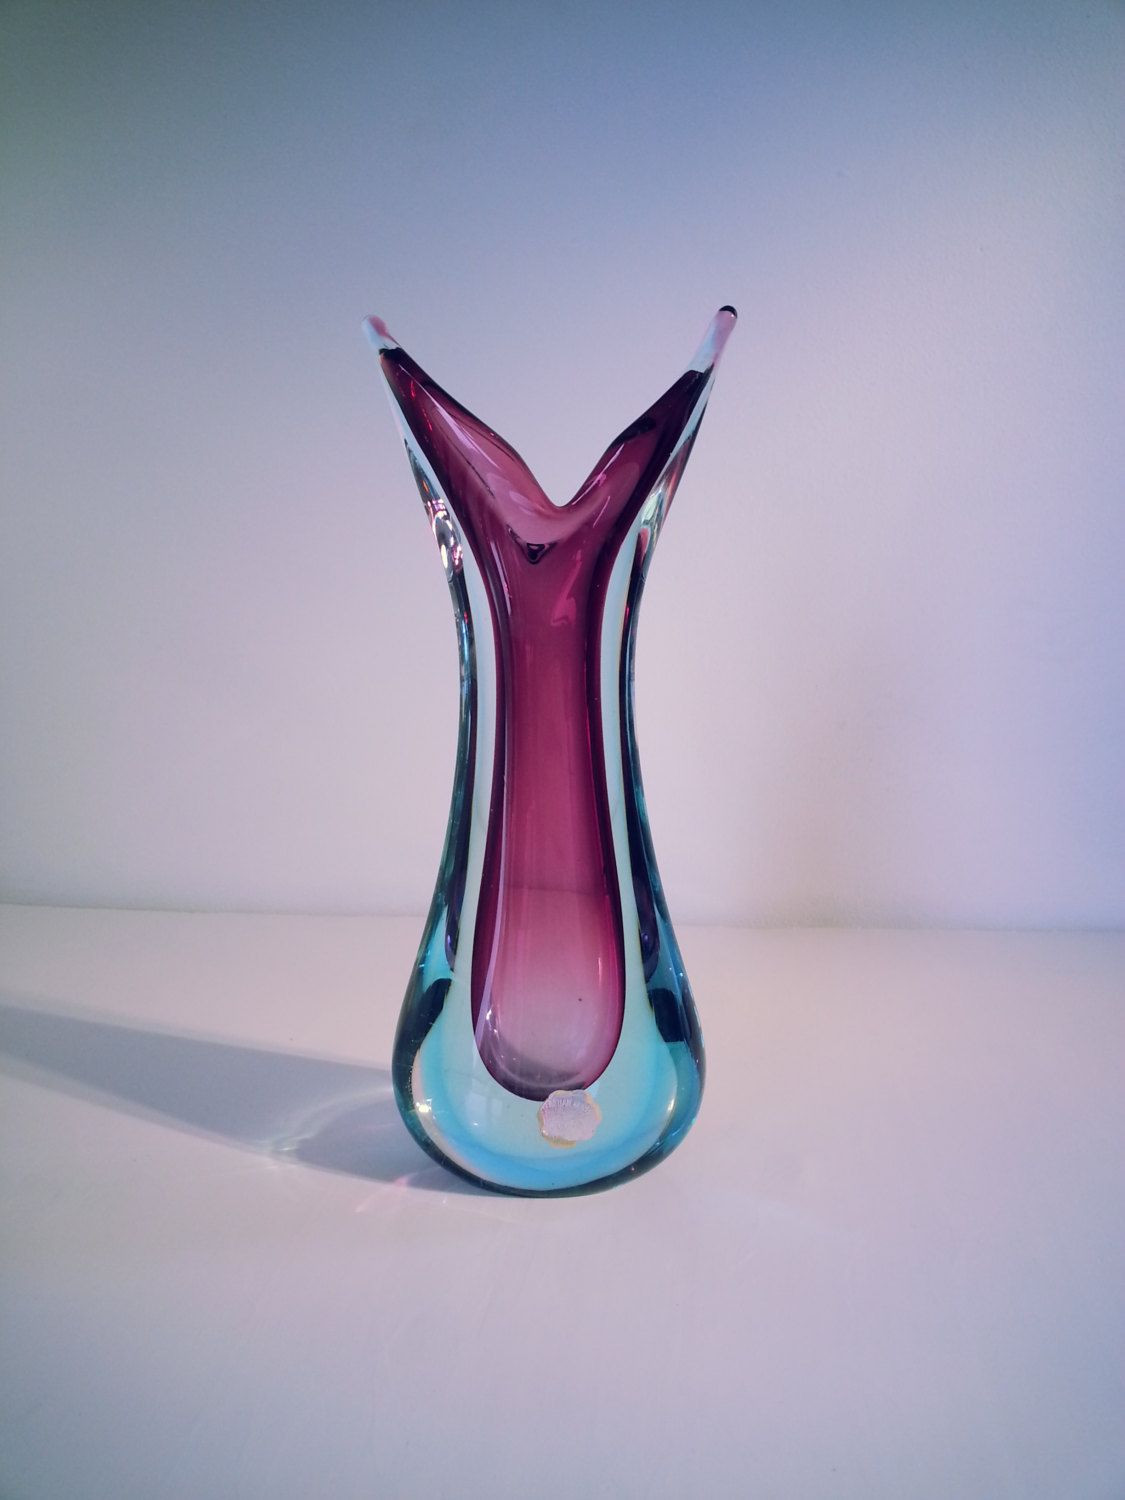 square glass vases for sale of murano sommerso genuine venetian glass 1950s 1960s purple blue intended for murano sommerso genuine venetian glass 1950s 1960s purple blue glass vase pulled design vase made in italy by fcollectables on etsy